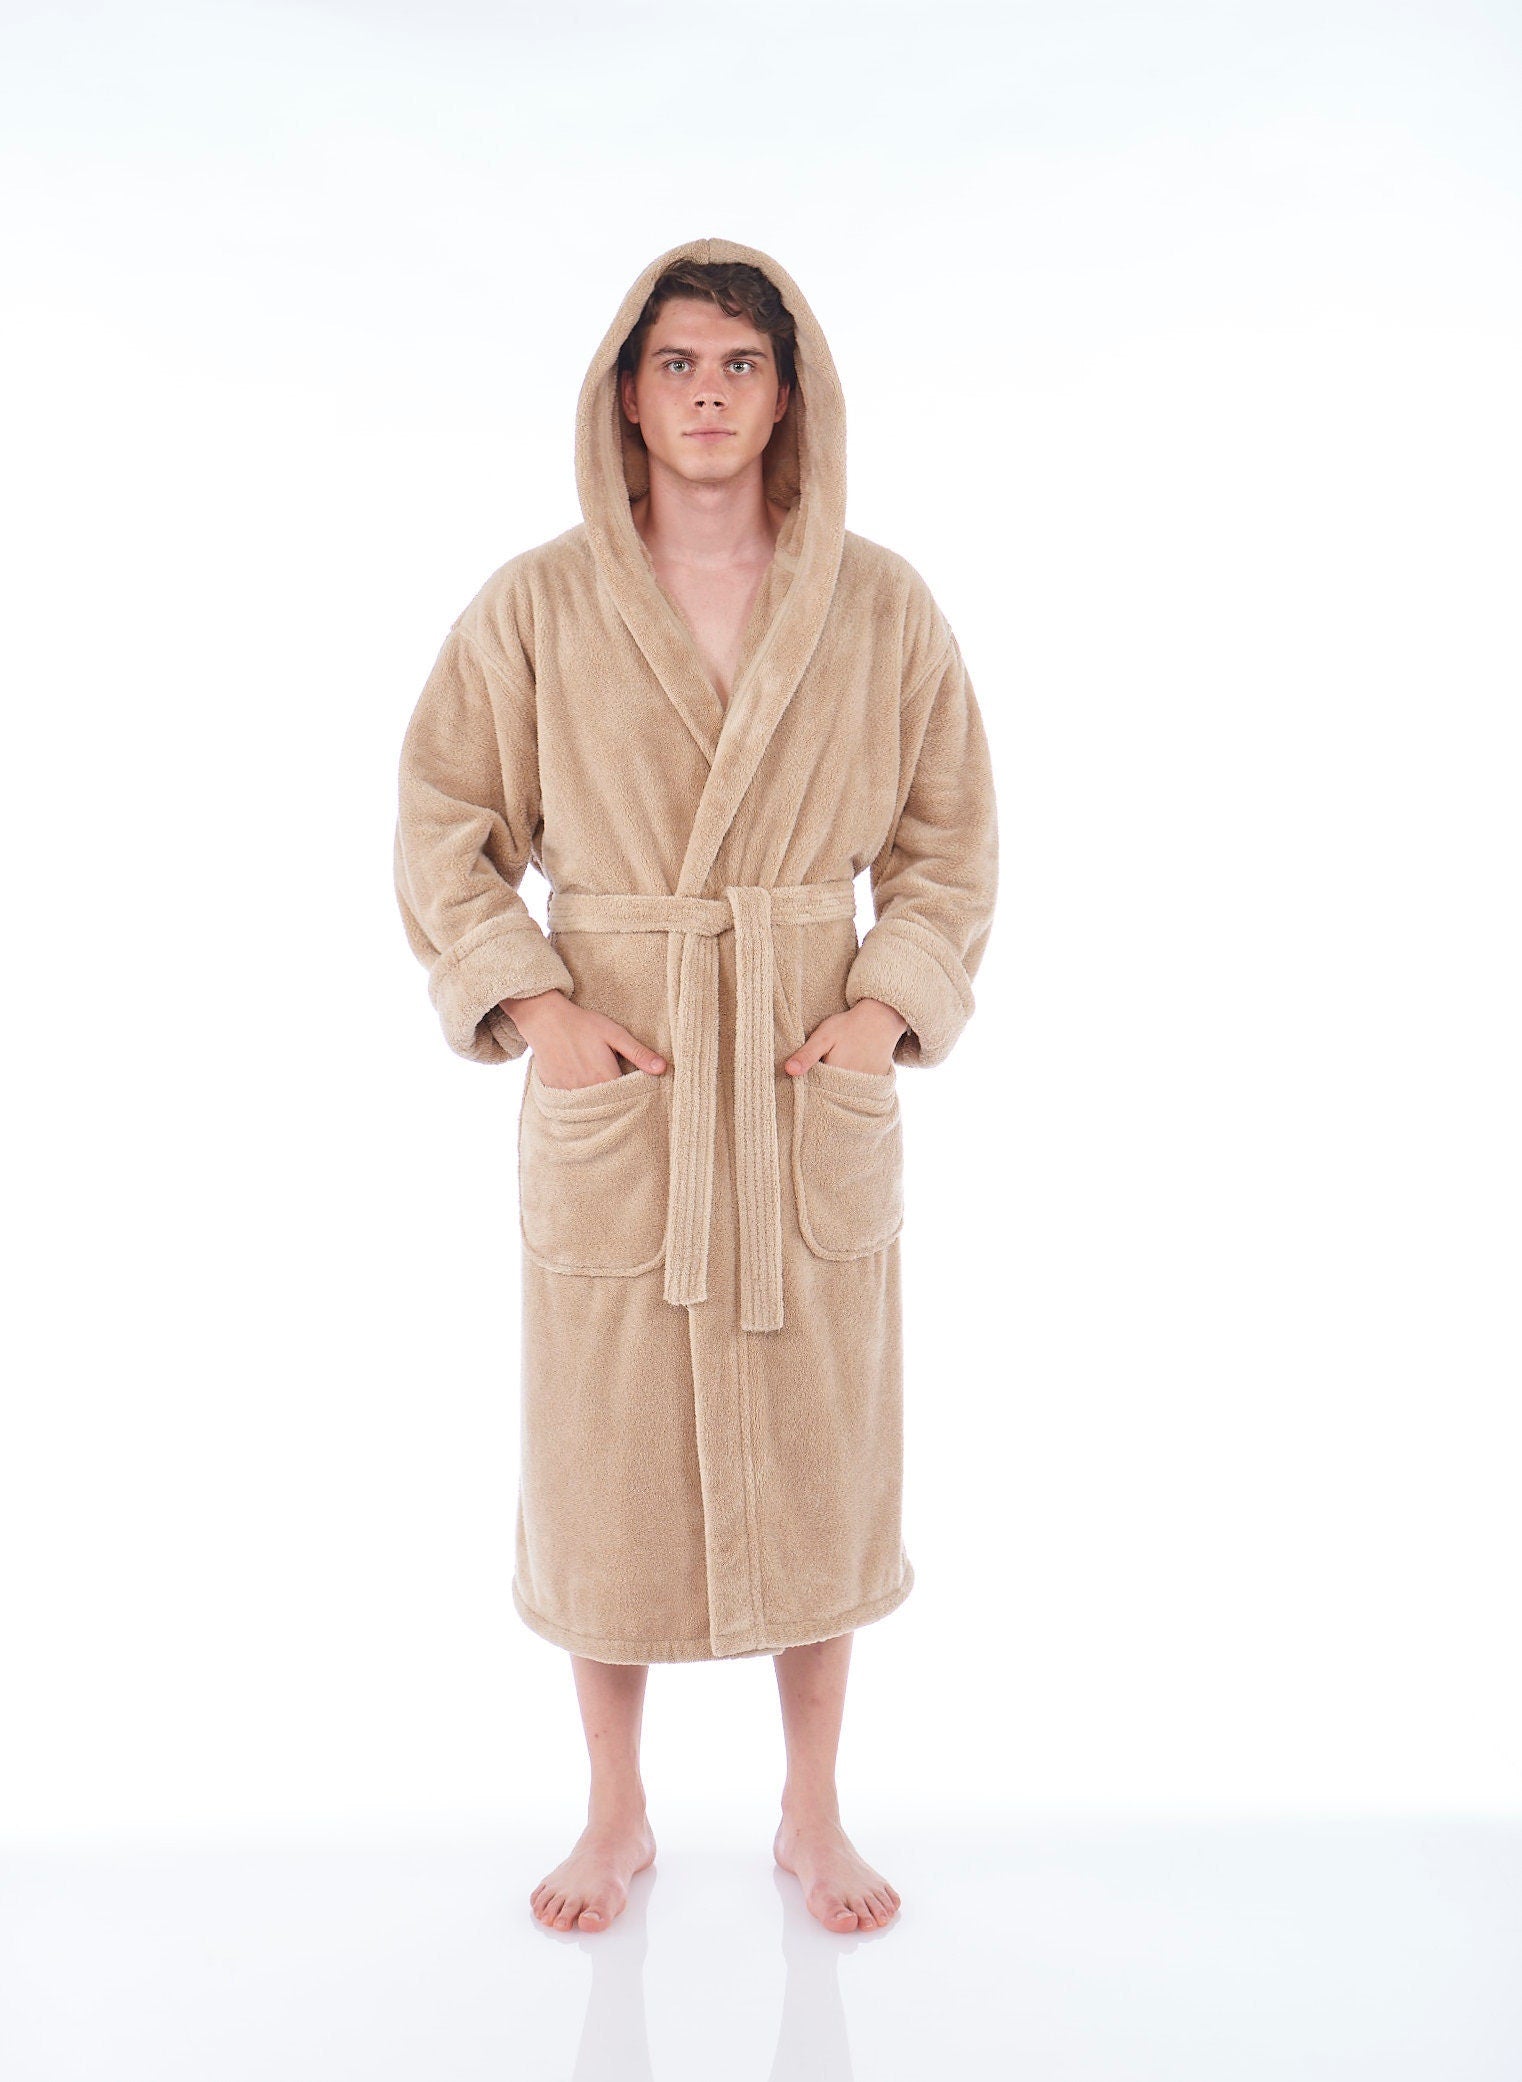 Gift for Him, Personalized, Fleece Plush, Soft, Plush and Warm Hooded Bathrobe | Made in Turkey, Monogrammed, One Size Fits Most / Medium